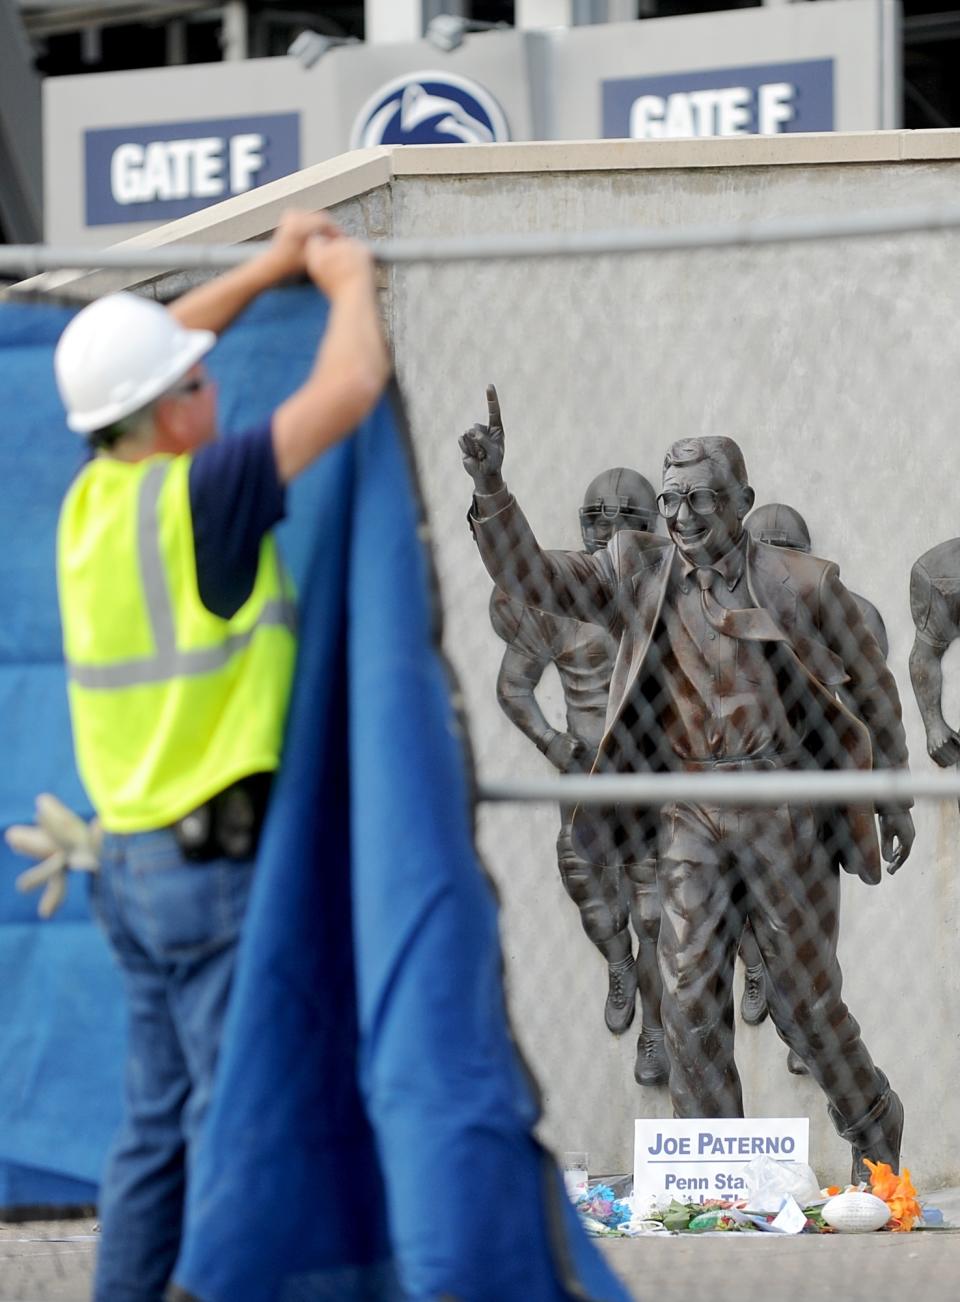 FILE - In this Sunday, July 22, 2012 file photo, a worker hangs a blue tarp over a fence that was installed around the Joe Paterno statue as crews worked to remove the statue in State College, Pa. The university removed the monument in the wake of an investigative report that found that the late coach and three other top Penn State administrators concealed sex abuse claims against Jerry Sandusky, who was convicted of sexually abusing 10 boys, sometimes on Penn State's campus. (Abby Drey/Centre Daily Times via AP)